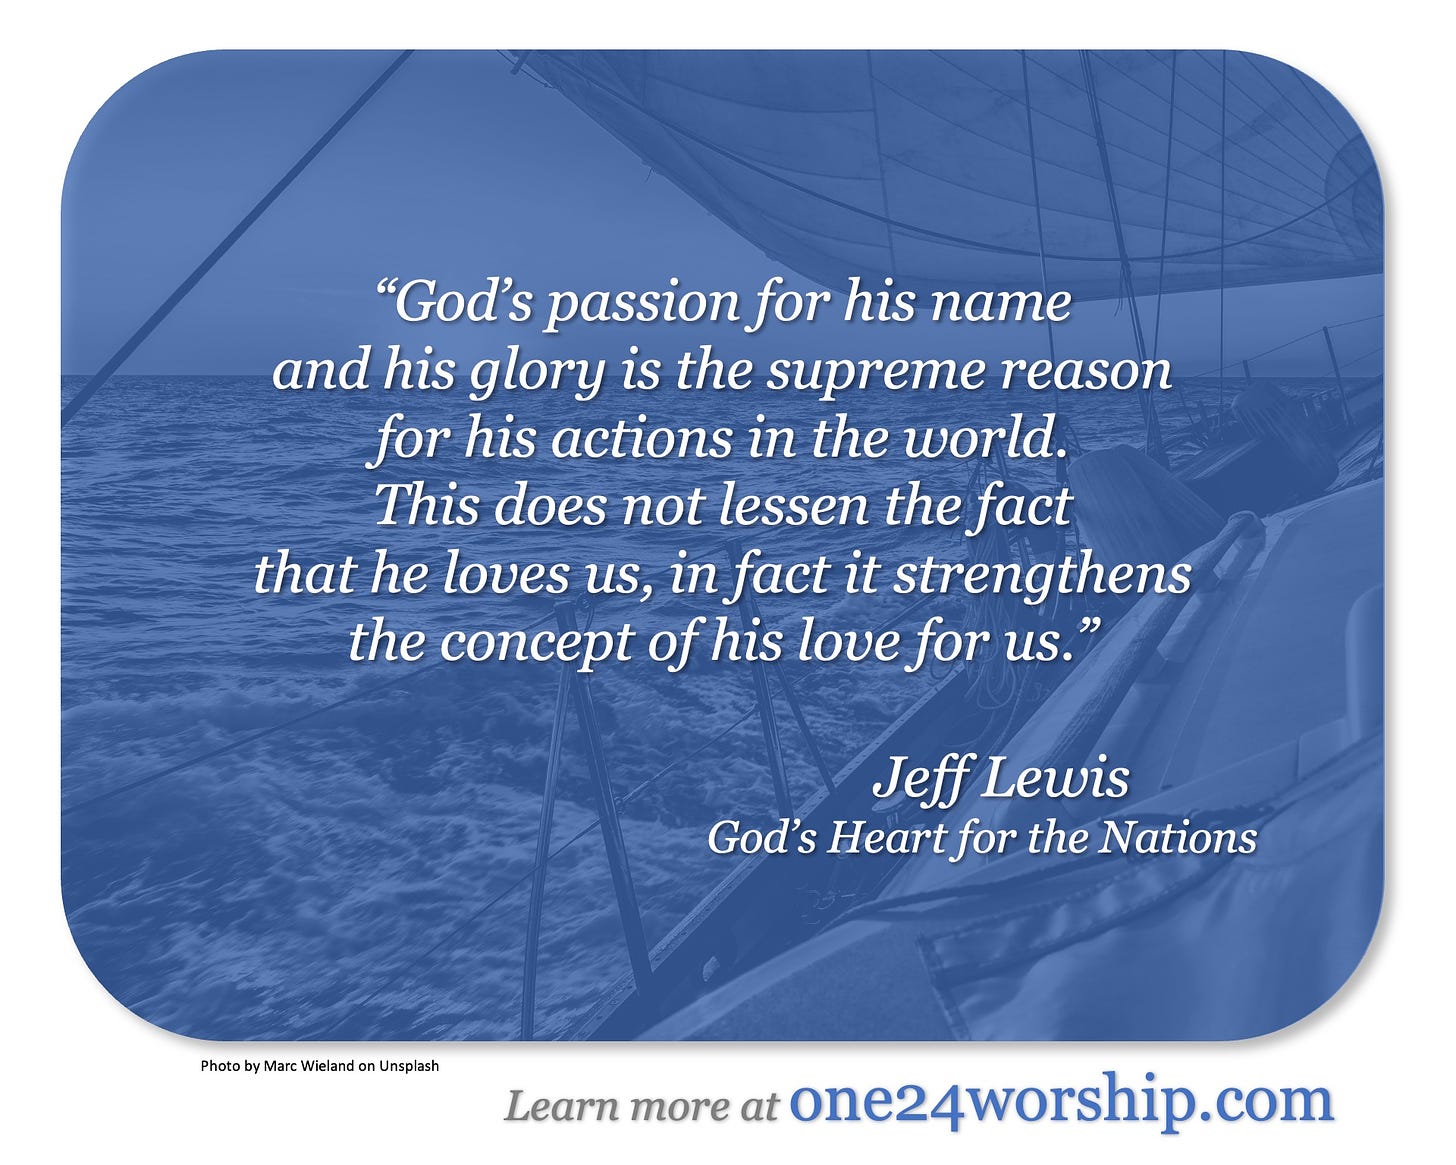 Image of the deck of a sailboat with the ocean and sunrise just off the port bow with Jeff Lewis quote superimposed.